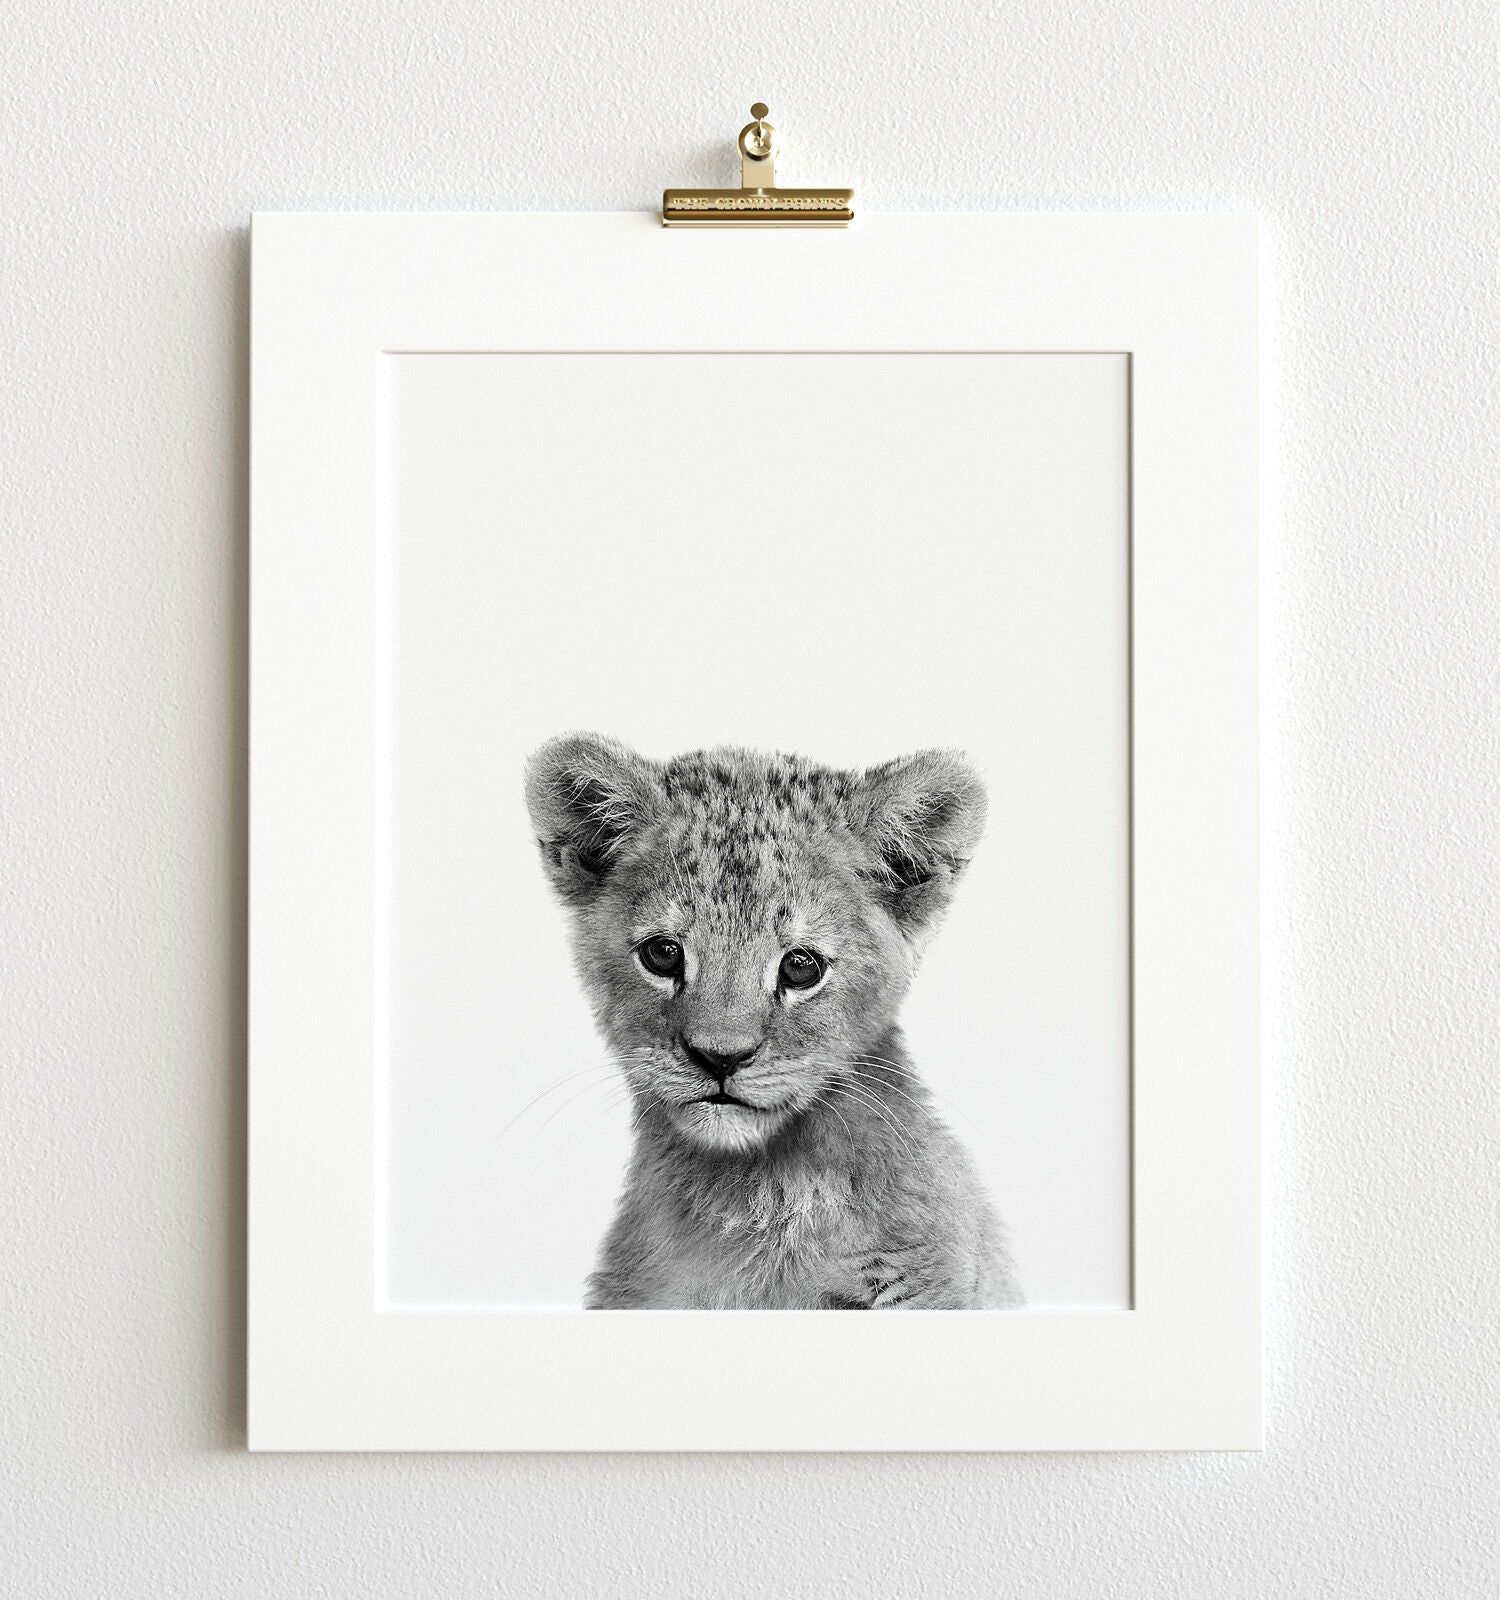 Baby Lion Black And White Print The Crown Prints